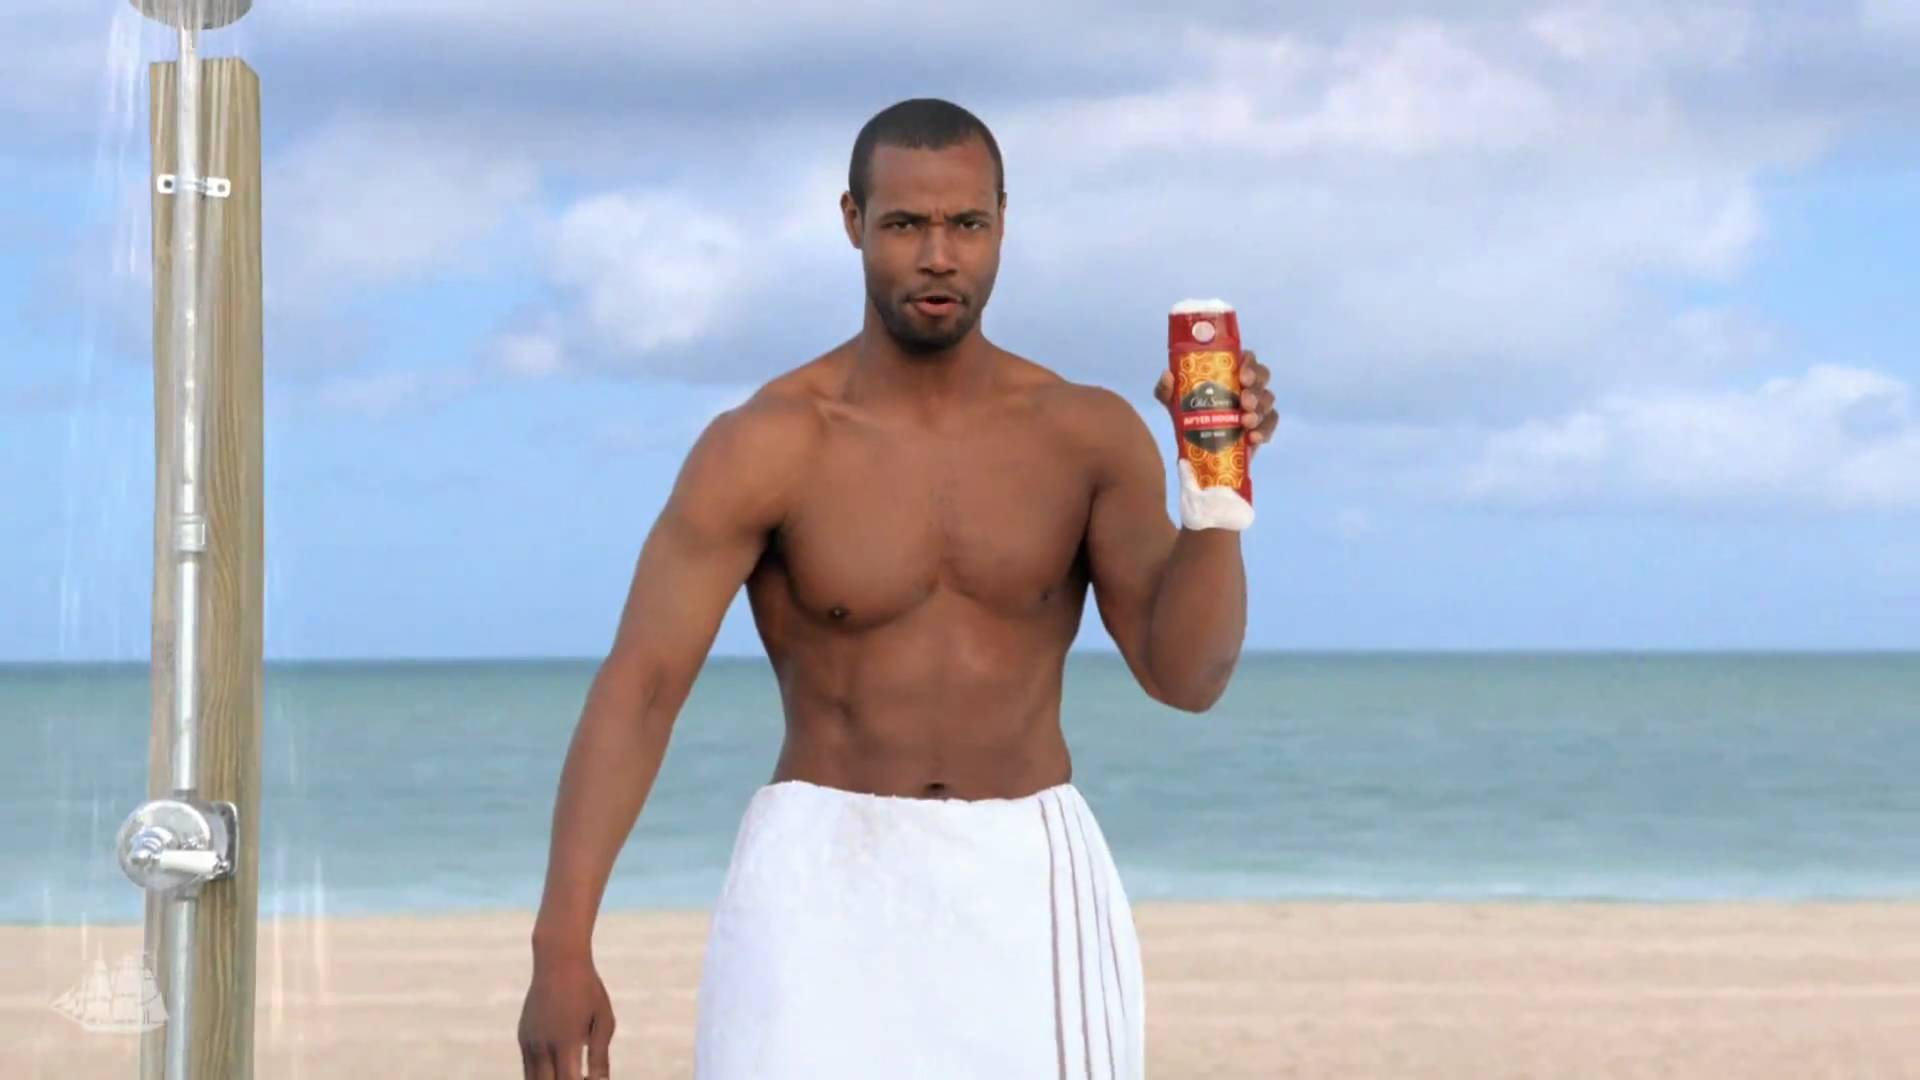 Old Spice: 5 Essentials for Spicing Up Your Branding Strategy